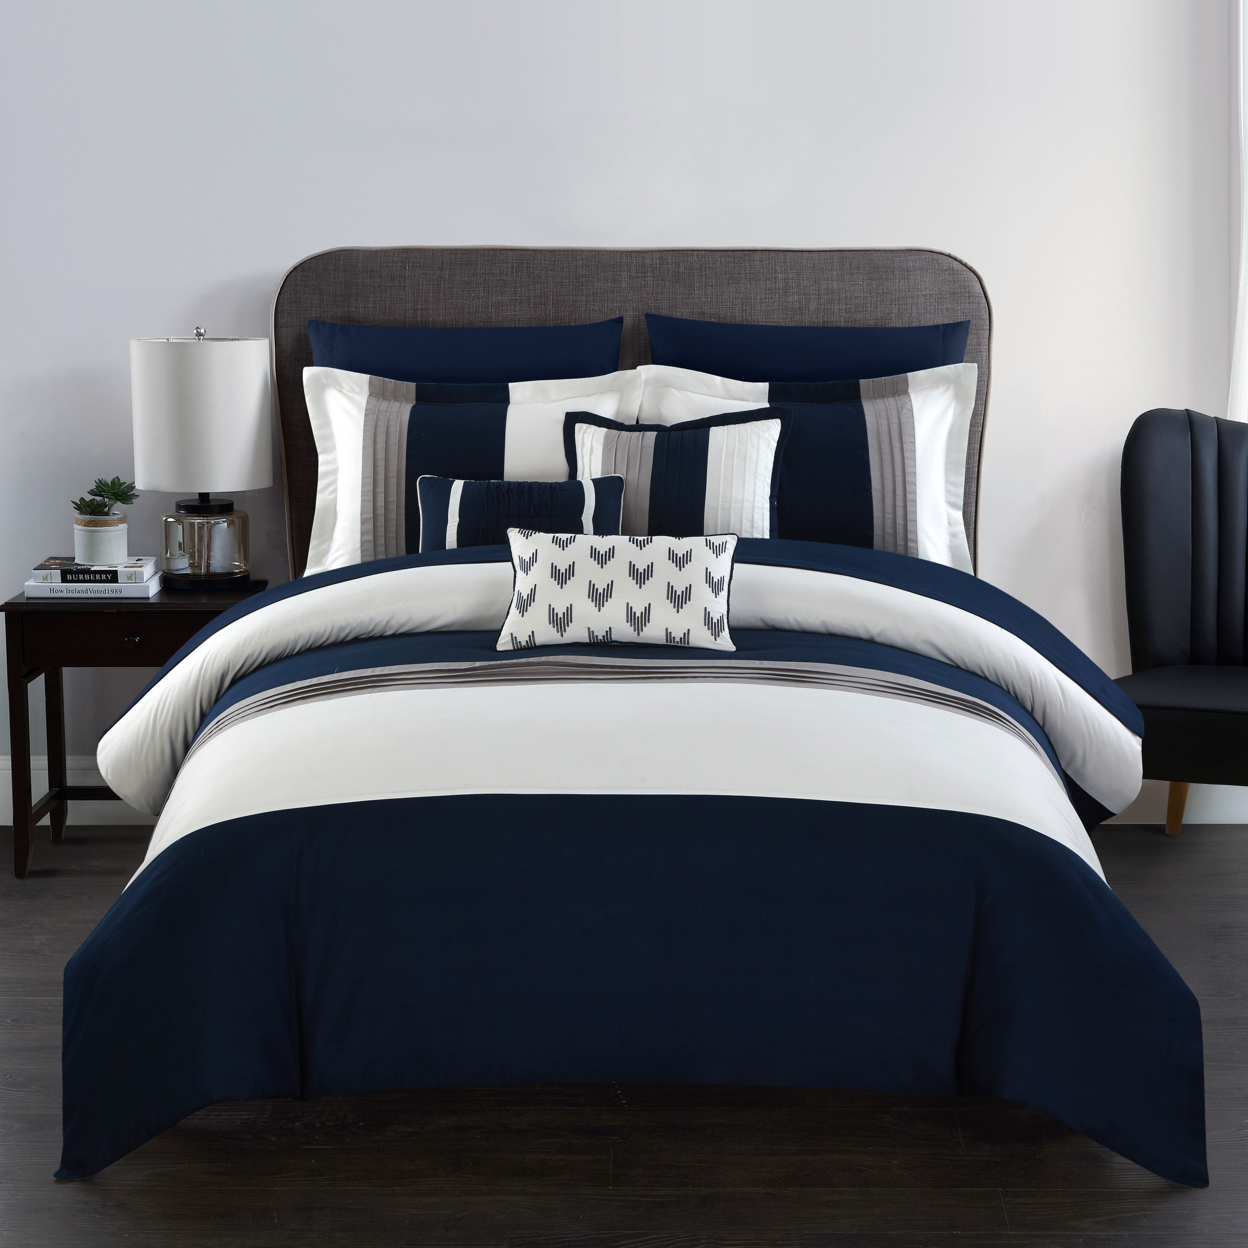 Rashi 10 Or 8 Piece Color Block Bed In A Bag Bedding And Comforter Set - Navy, King